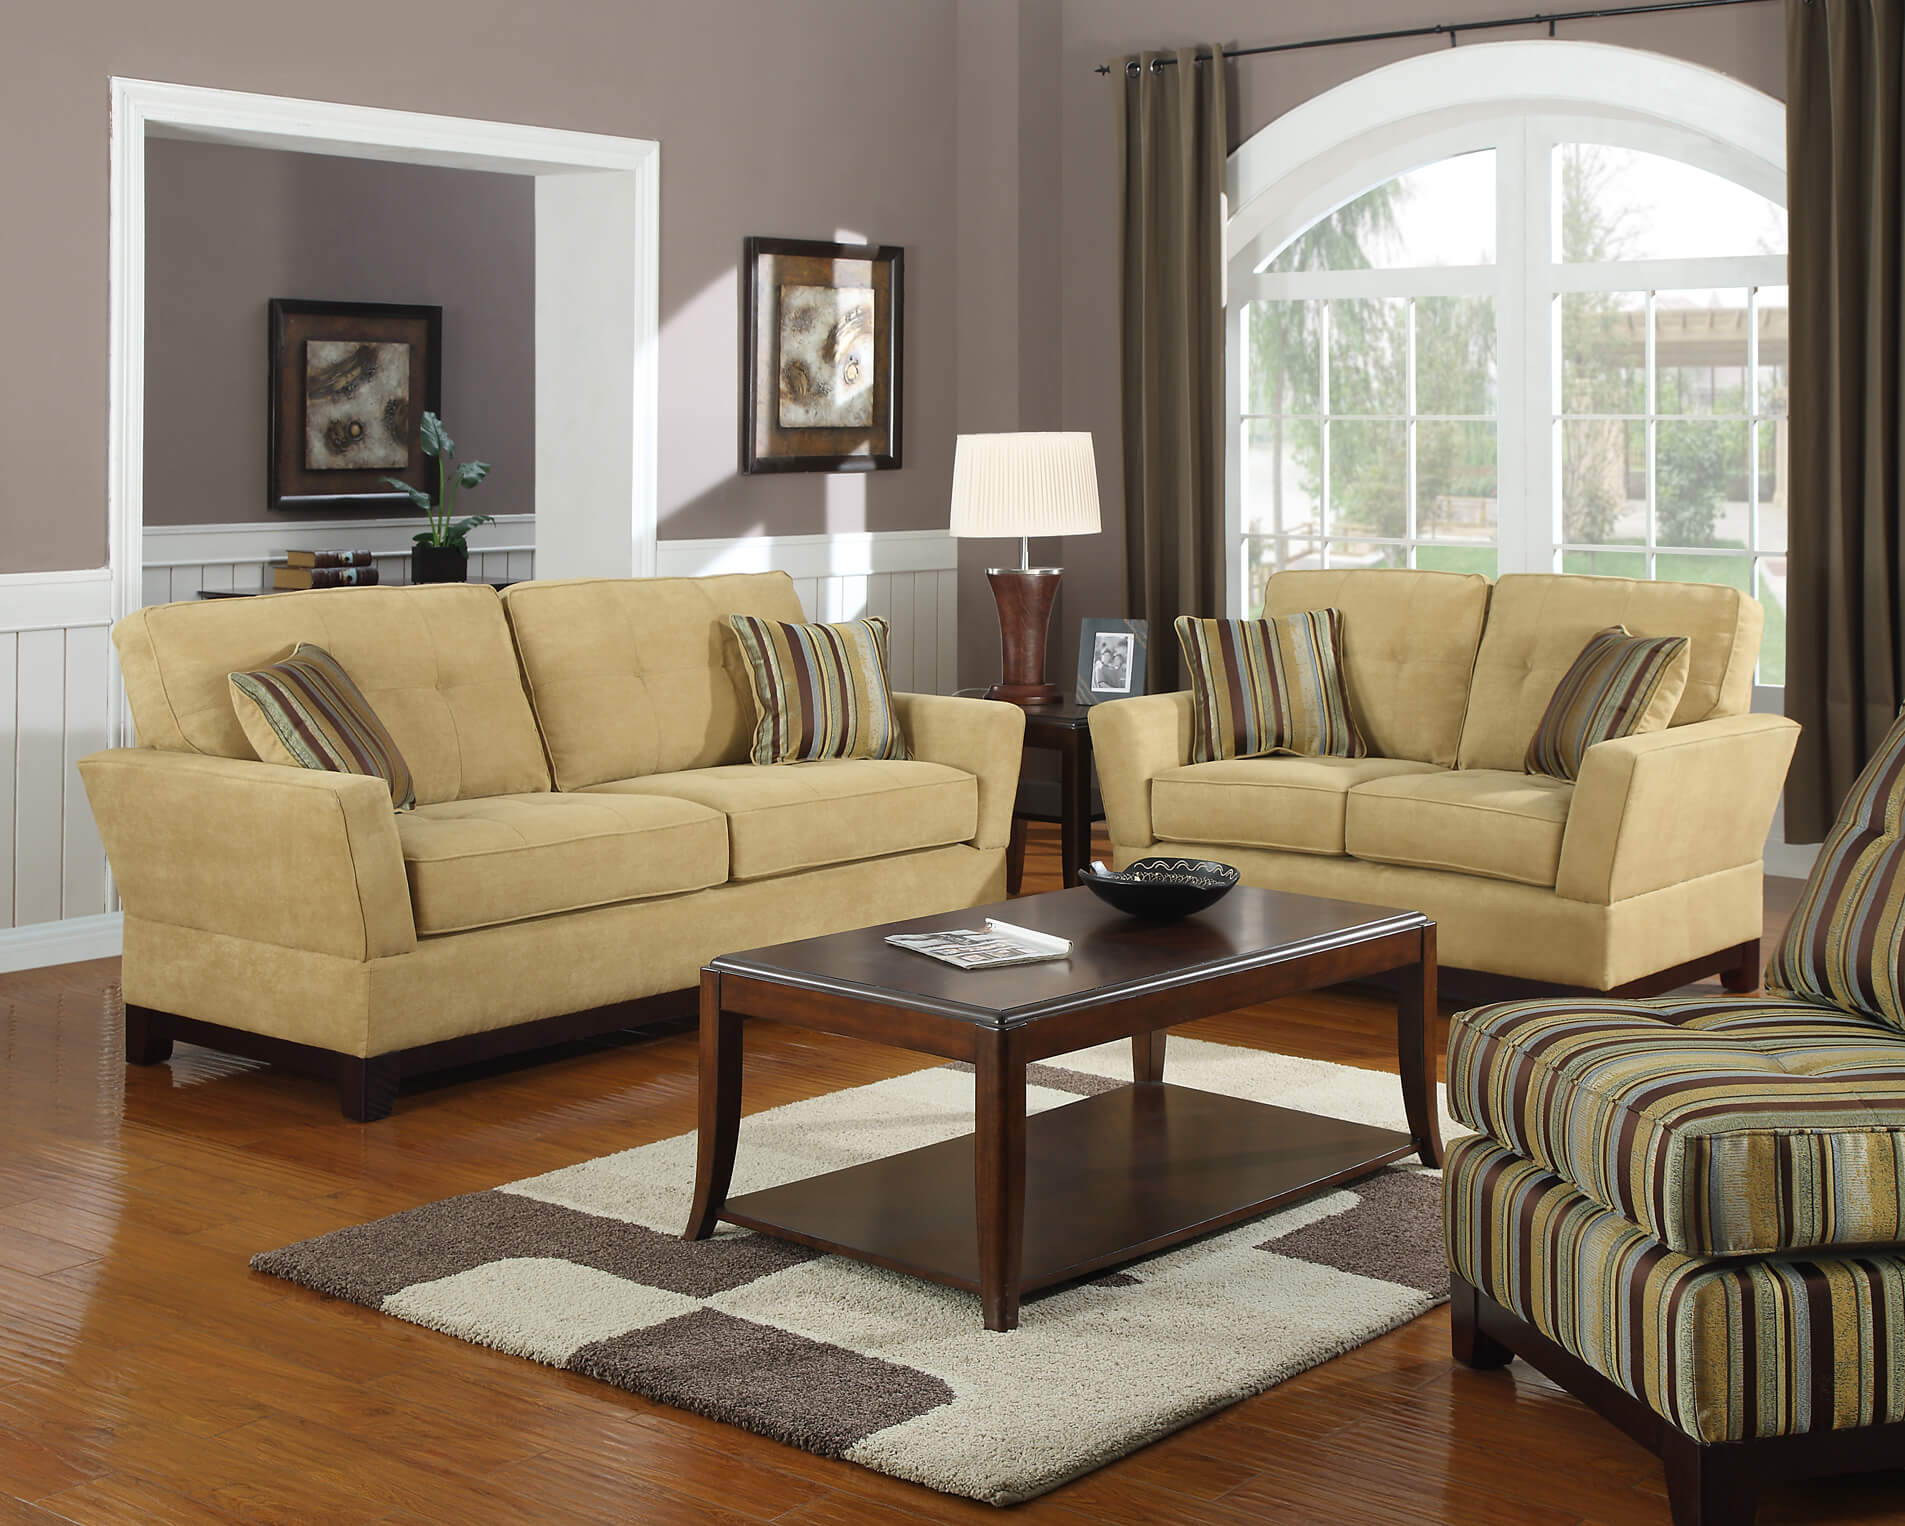 Small Living Room Set
 Simple Way to Decorate Small Living Room with Brown Color